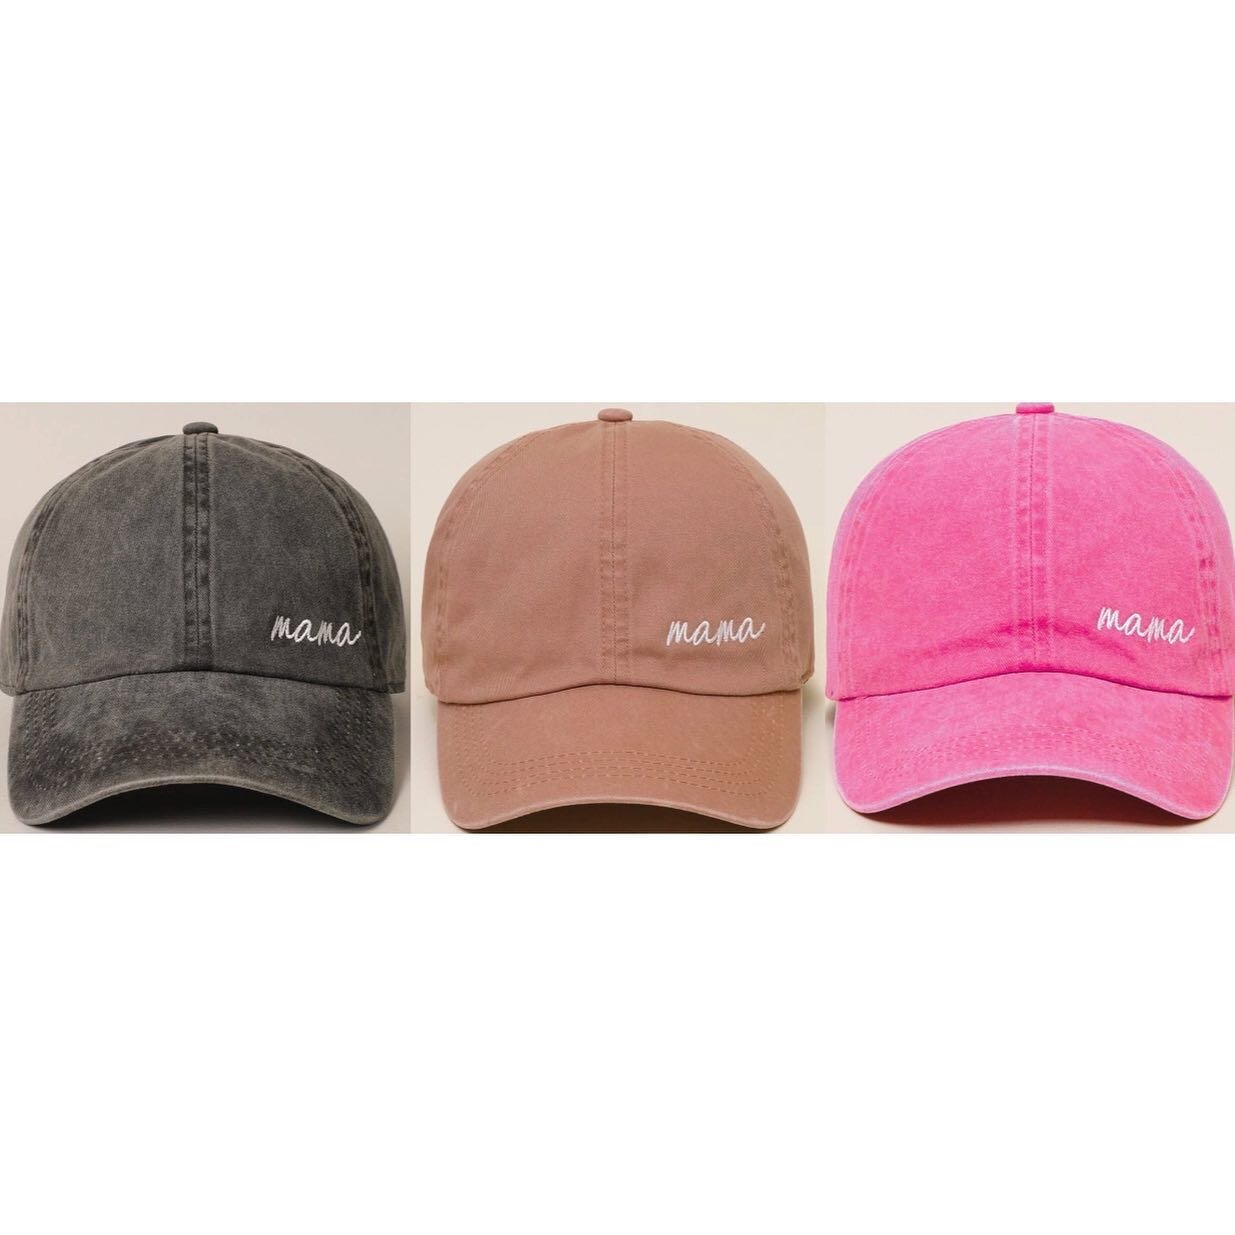 Sometimes it&rsquo;s just a hat day, right Mommas? 
:
Whether it&rsquo;s floating on the river, or watching that game this summer we got you Mommas! Of course though always remember your sunscreen 😎
:
#open #fashion #comfy #treatyourself #treats #ha